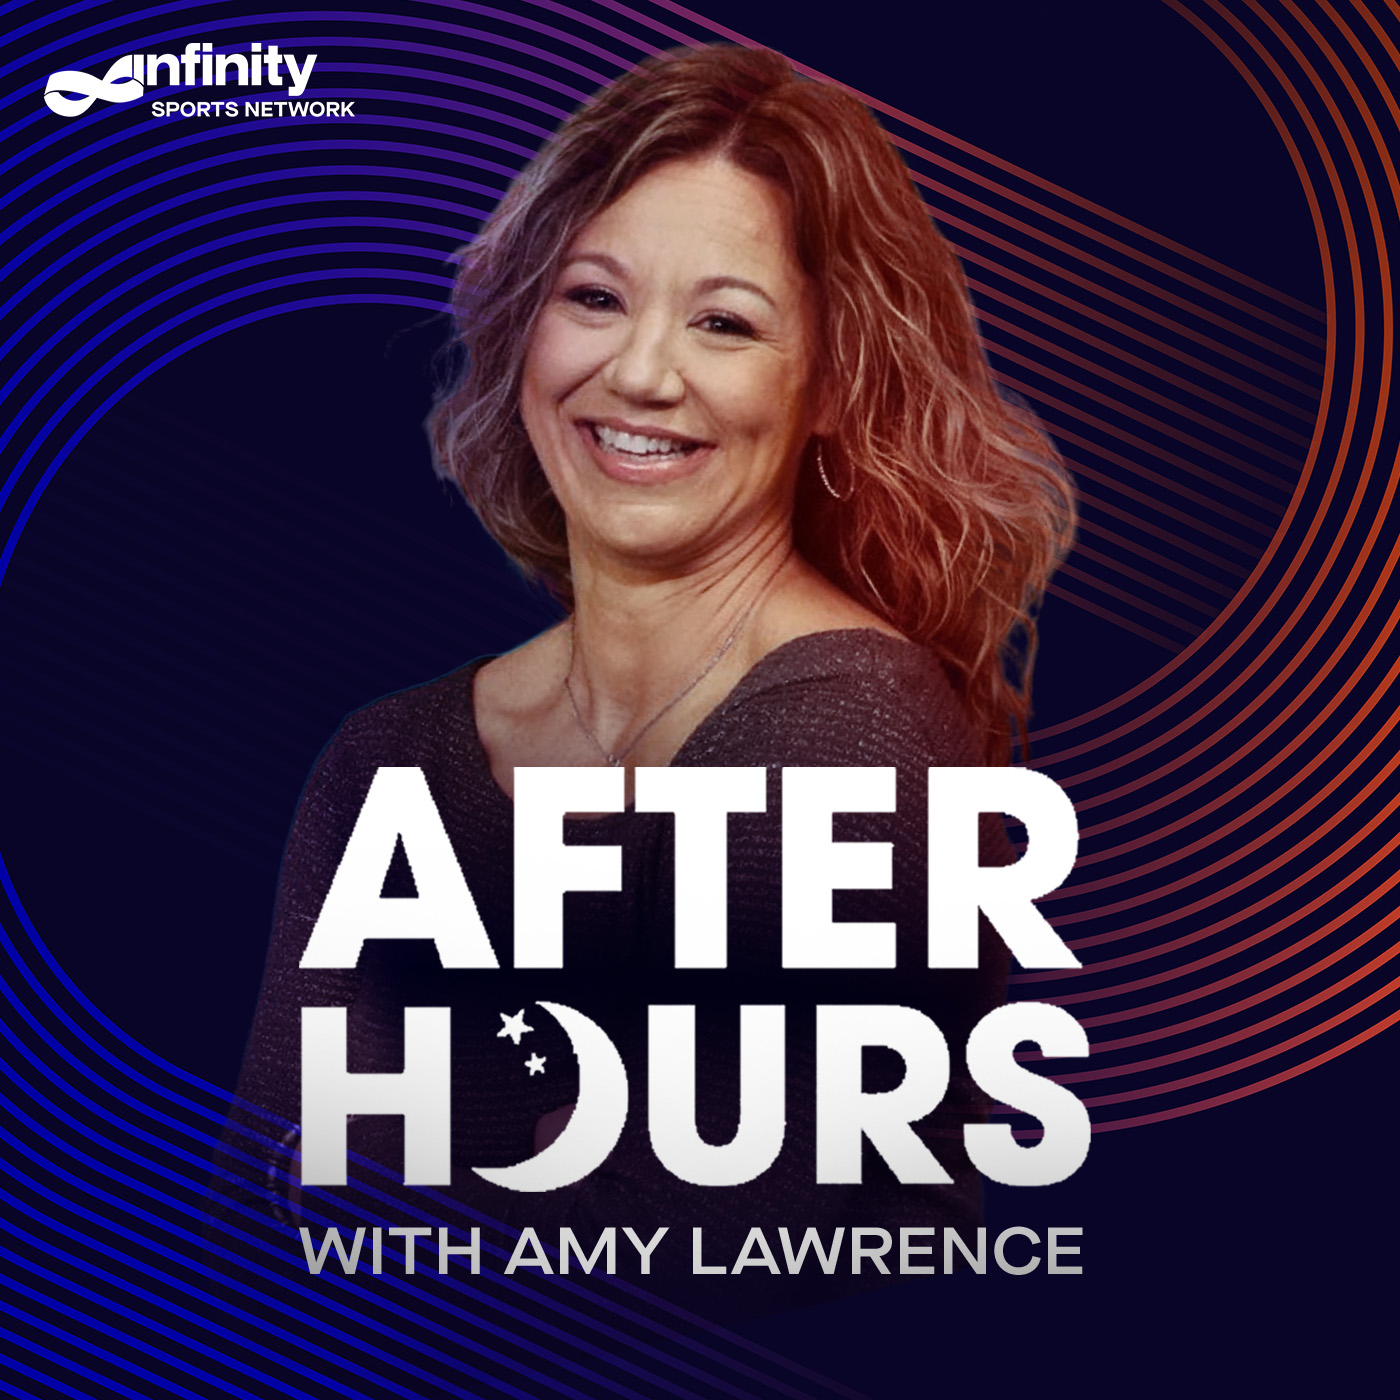 6/23/21 After Hours with Amy Lawrence PODCAST: Hour 1